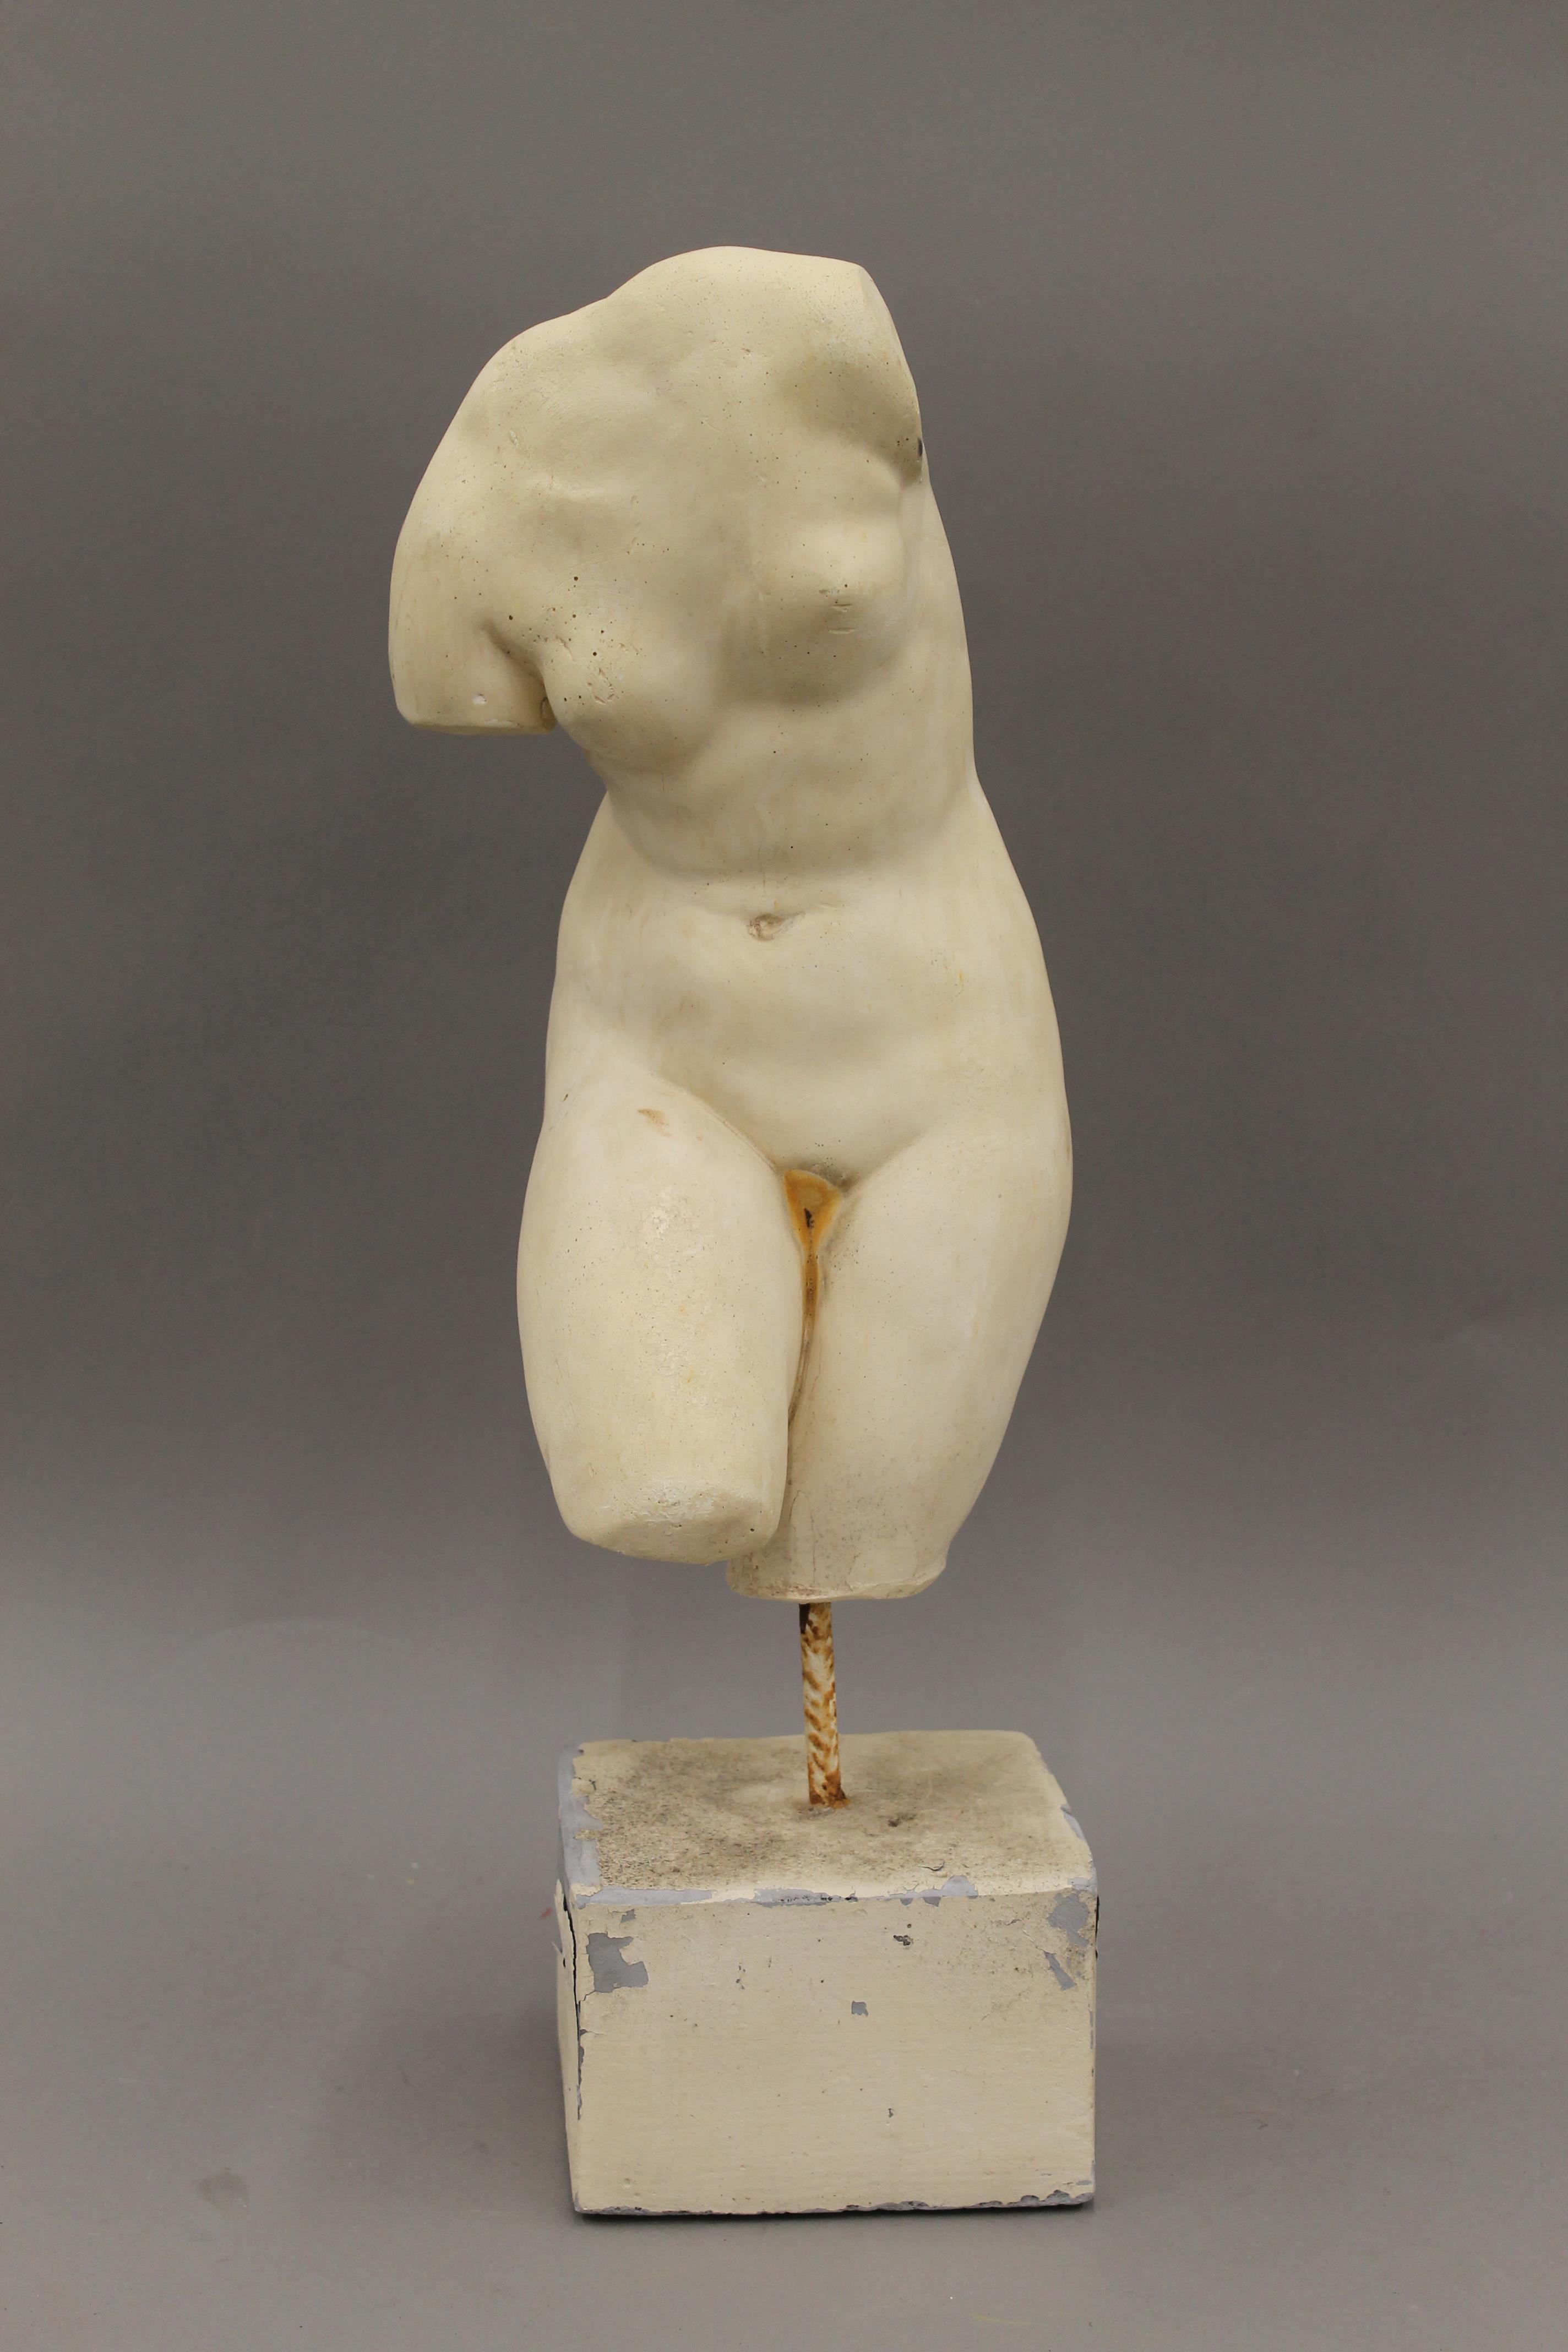 A plaster model of a female torso mounted on a display plinth. 49 cm high.